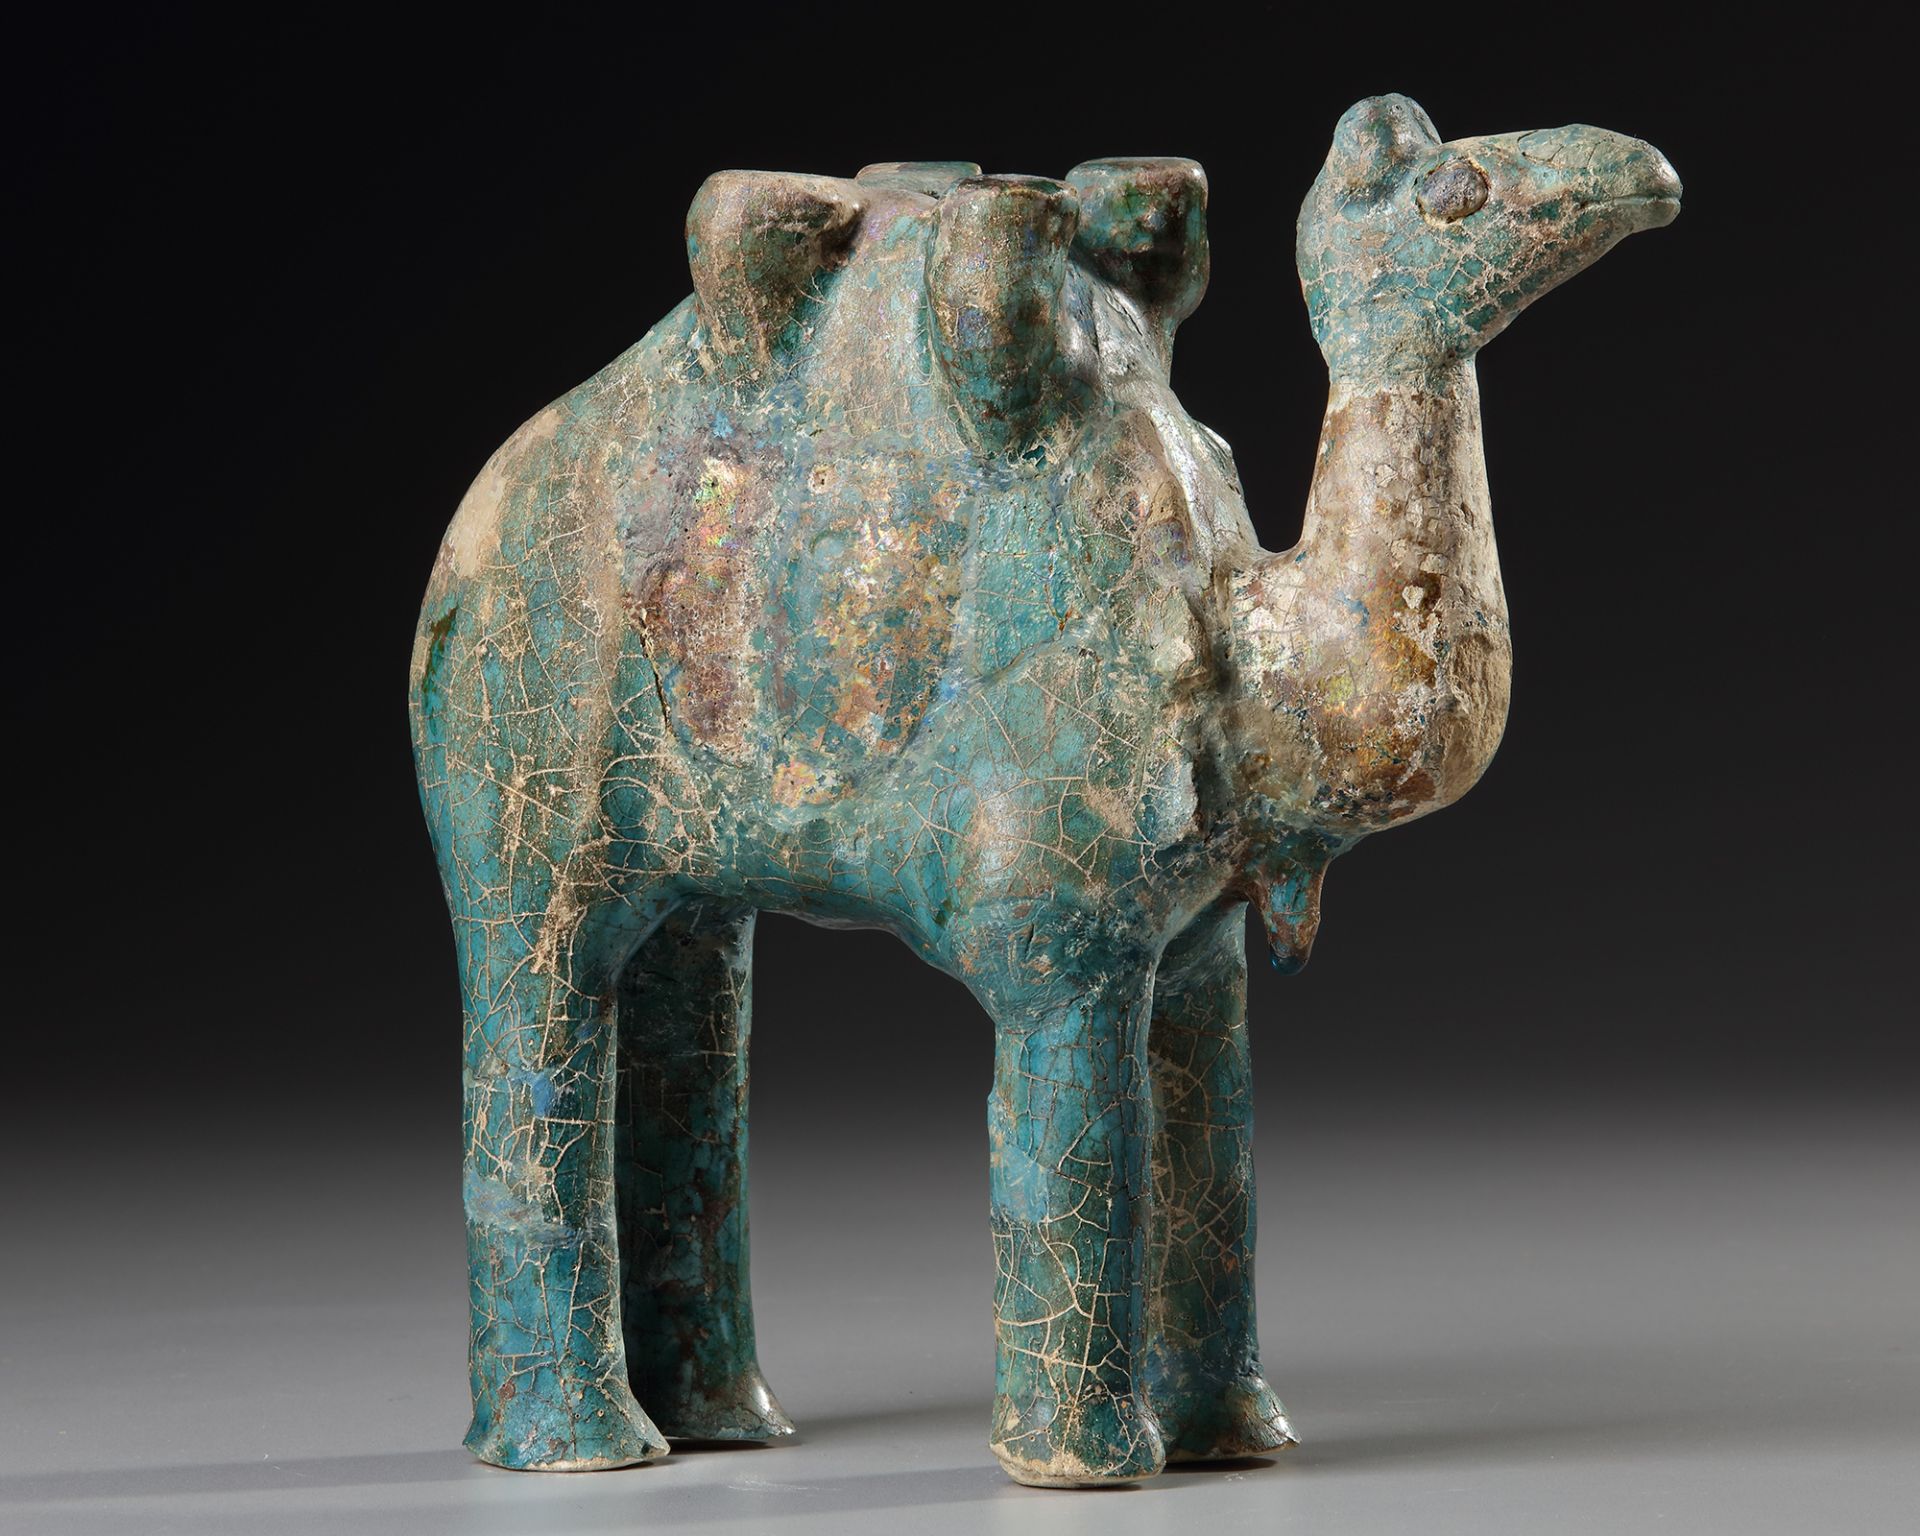 A TURQUOISE GLAZED POTTERY FIGURE OF A CAMEL, KASHAN, PERSIA, 11TH-12TH CENTURY - Image 6 of 8